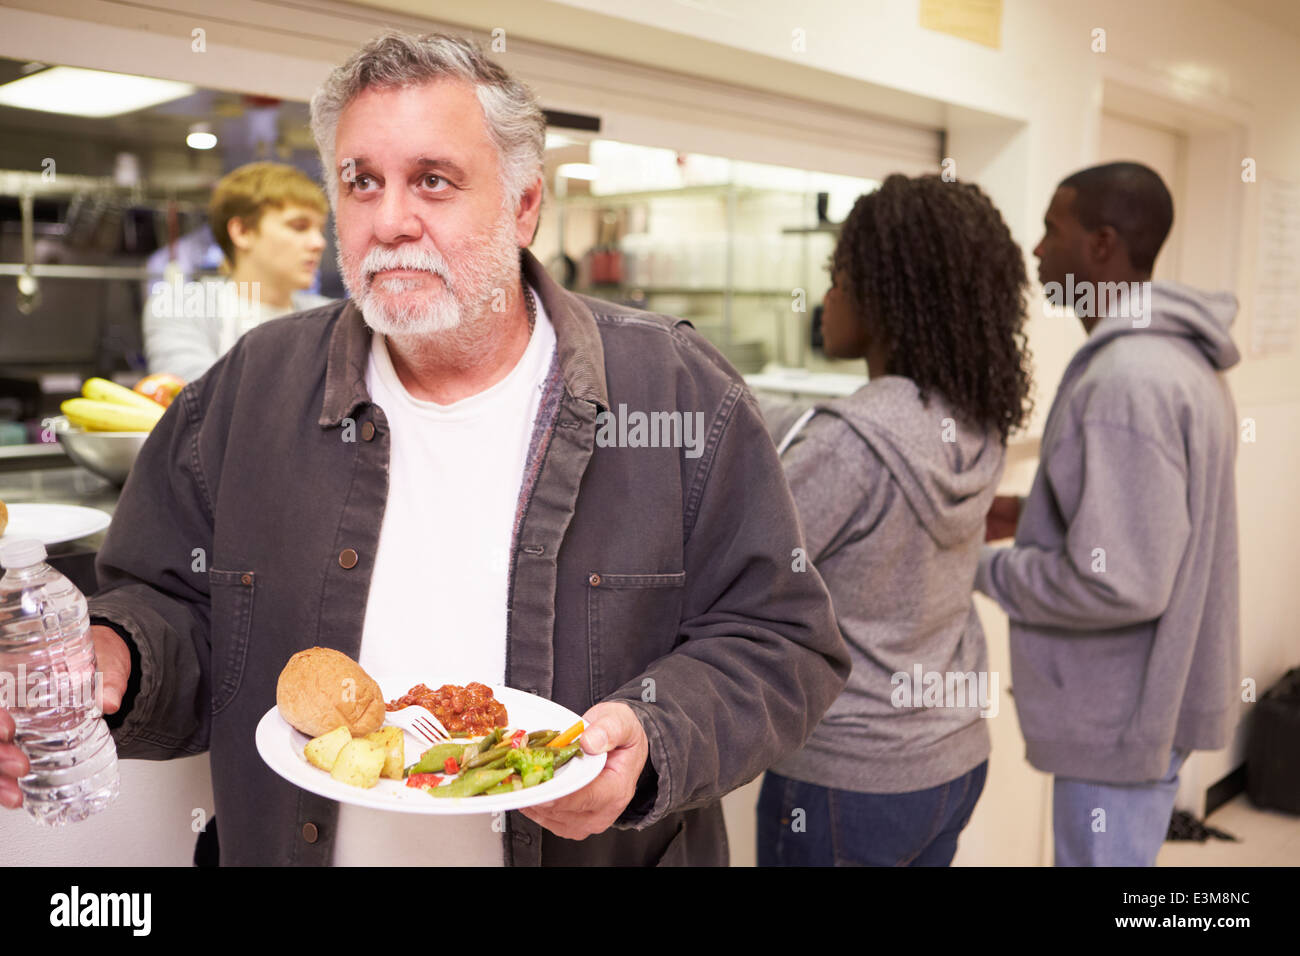 Kitchen Serving Food In Homeless Shelter Stock Photo